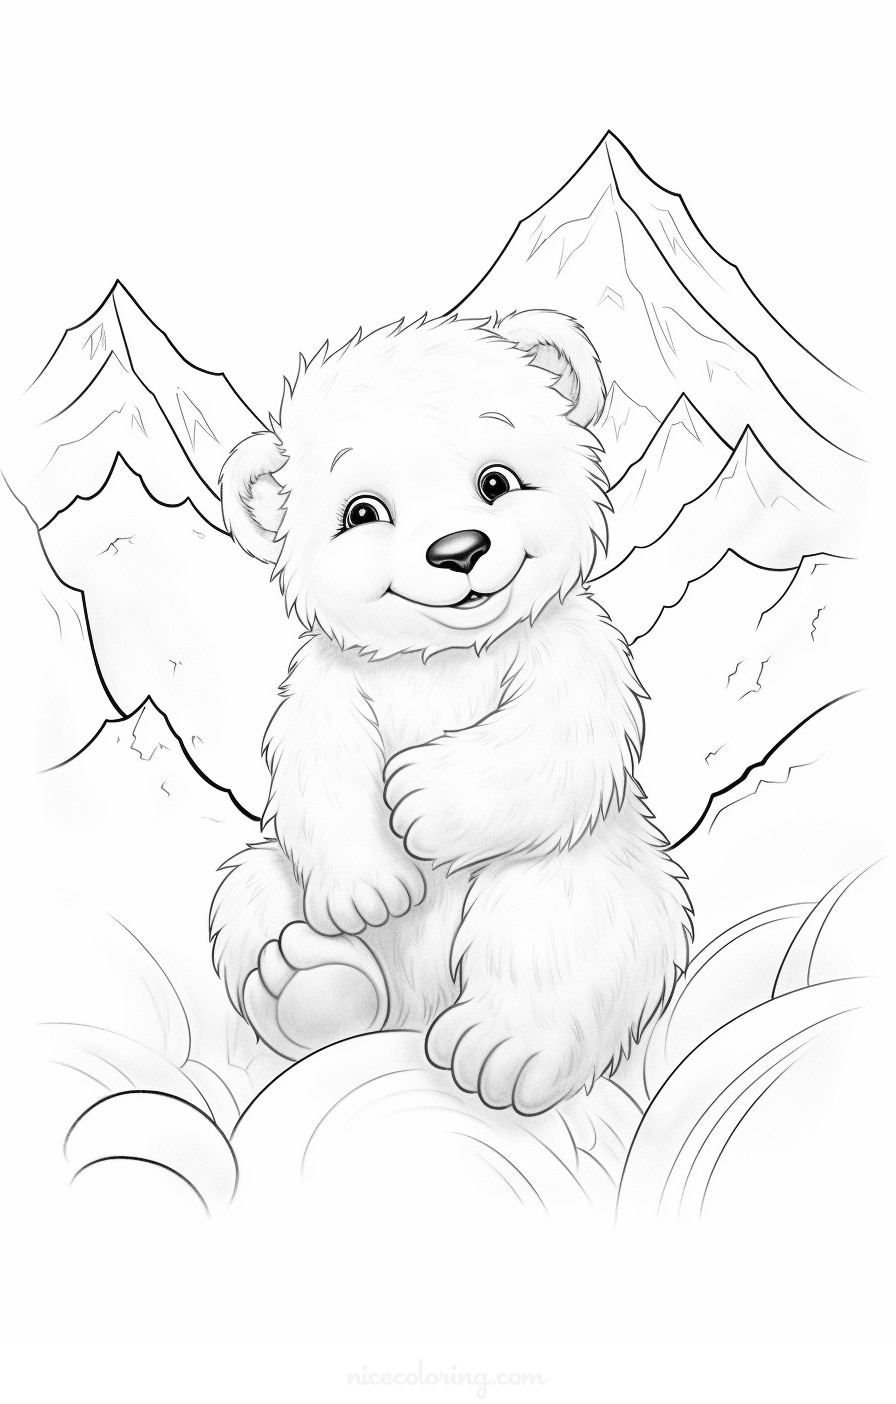 A bear family in the forest coloring page